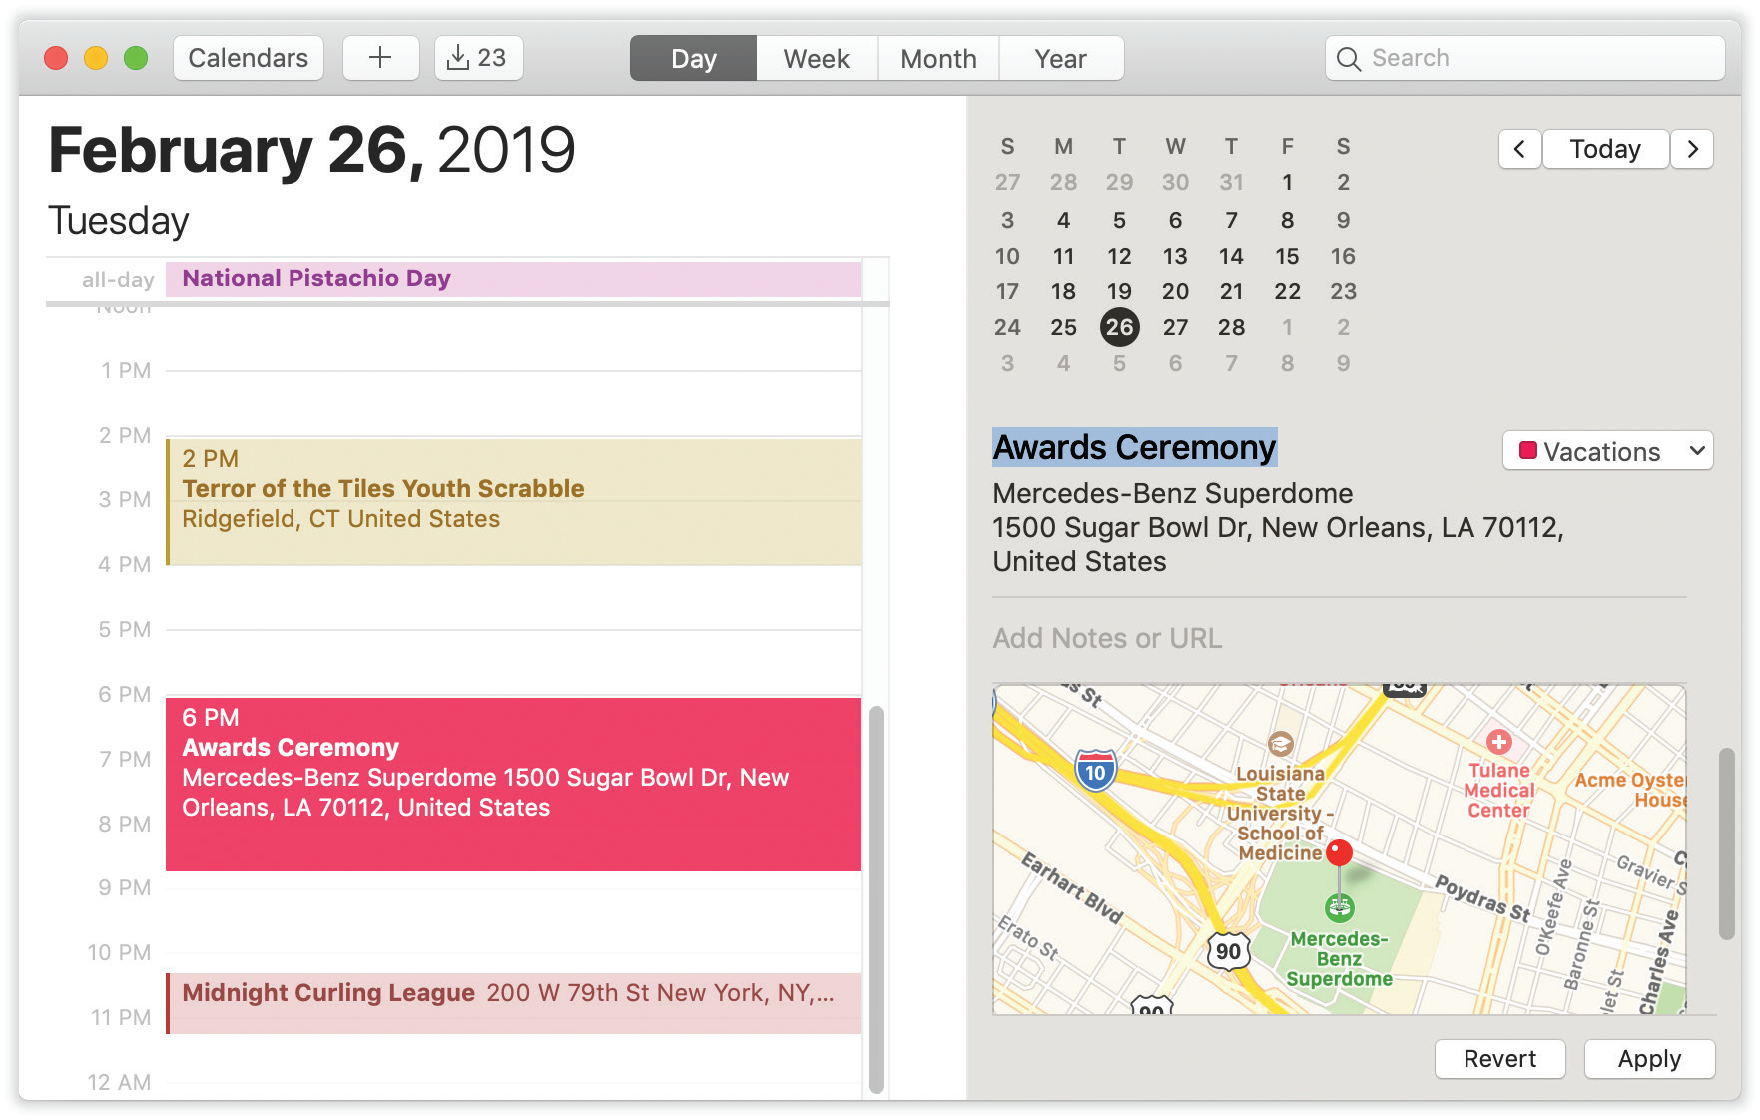 In Calendar, the and buttons at top right take you to the previous or next day, week, month, or year (depending on your current view). In the Day view, shown here, you can click the tiny numbers on the mini-calendar to change days.